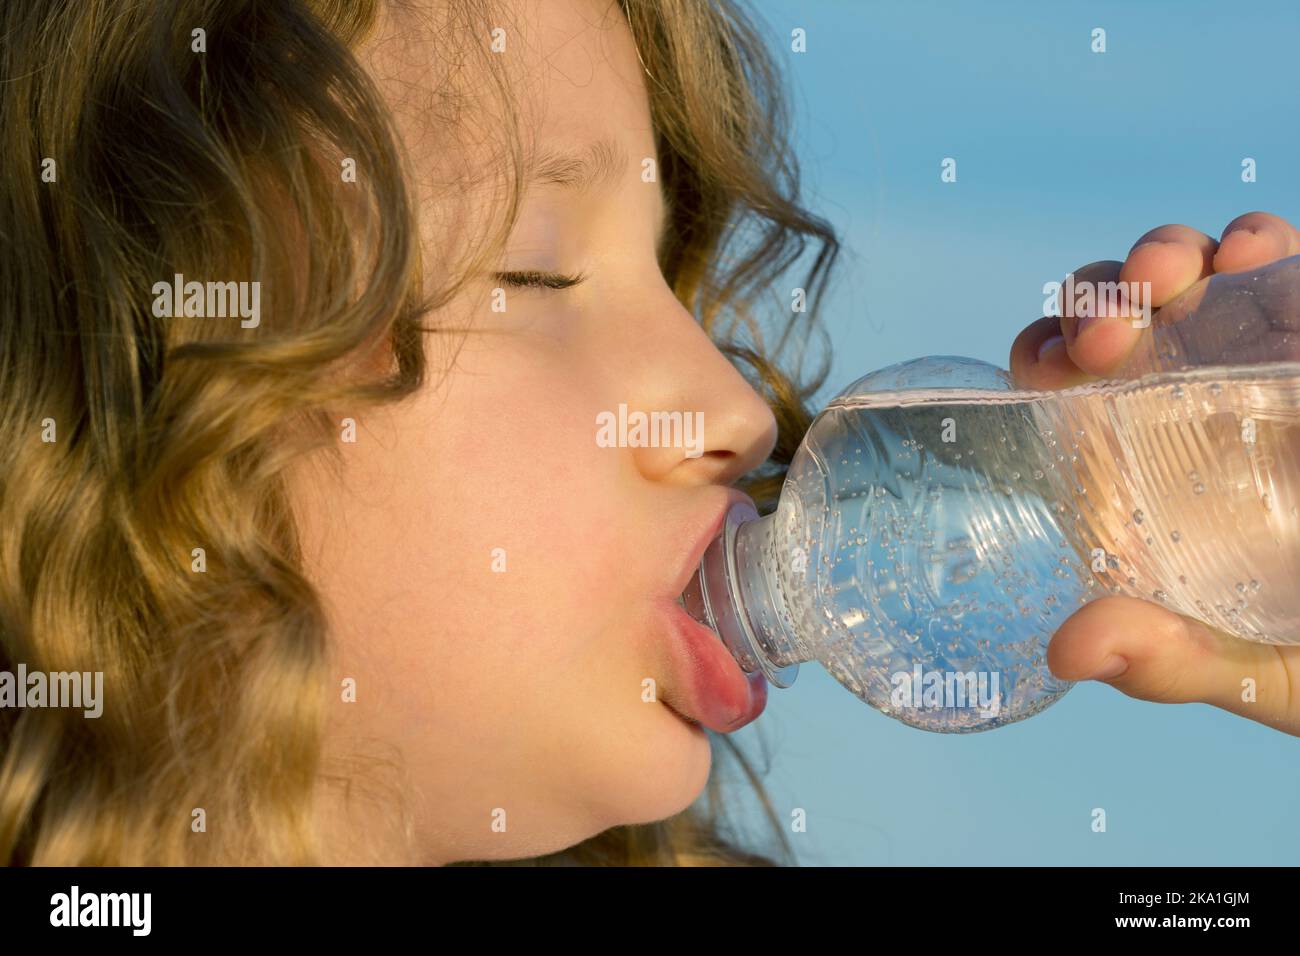 Girl drinks mineral water from PET bottle Stock Photo